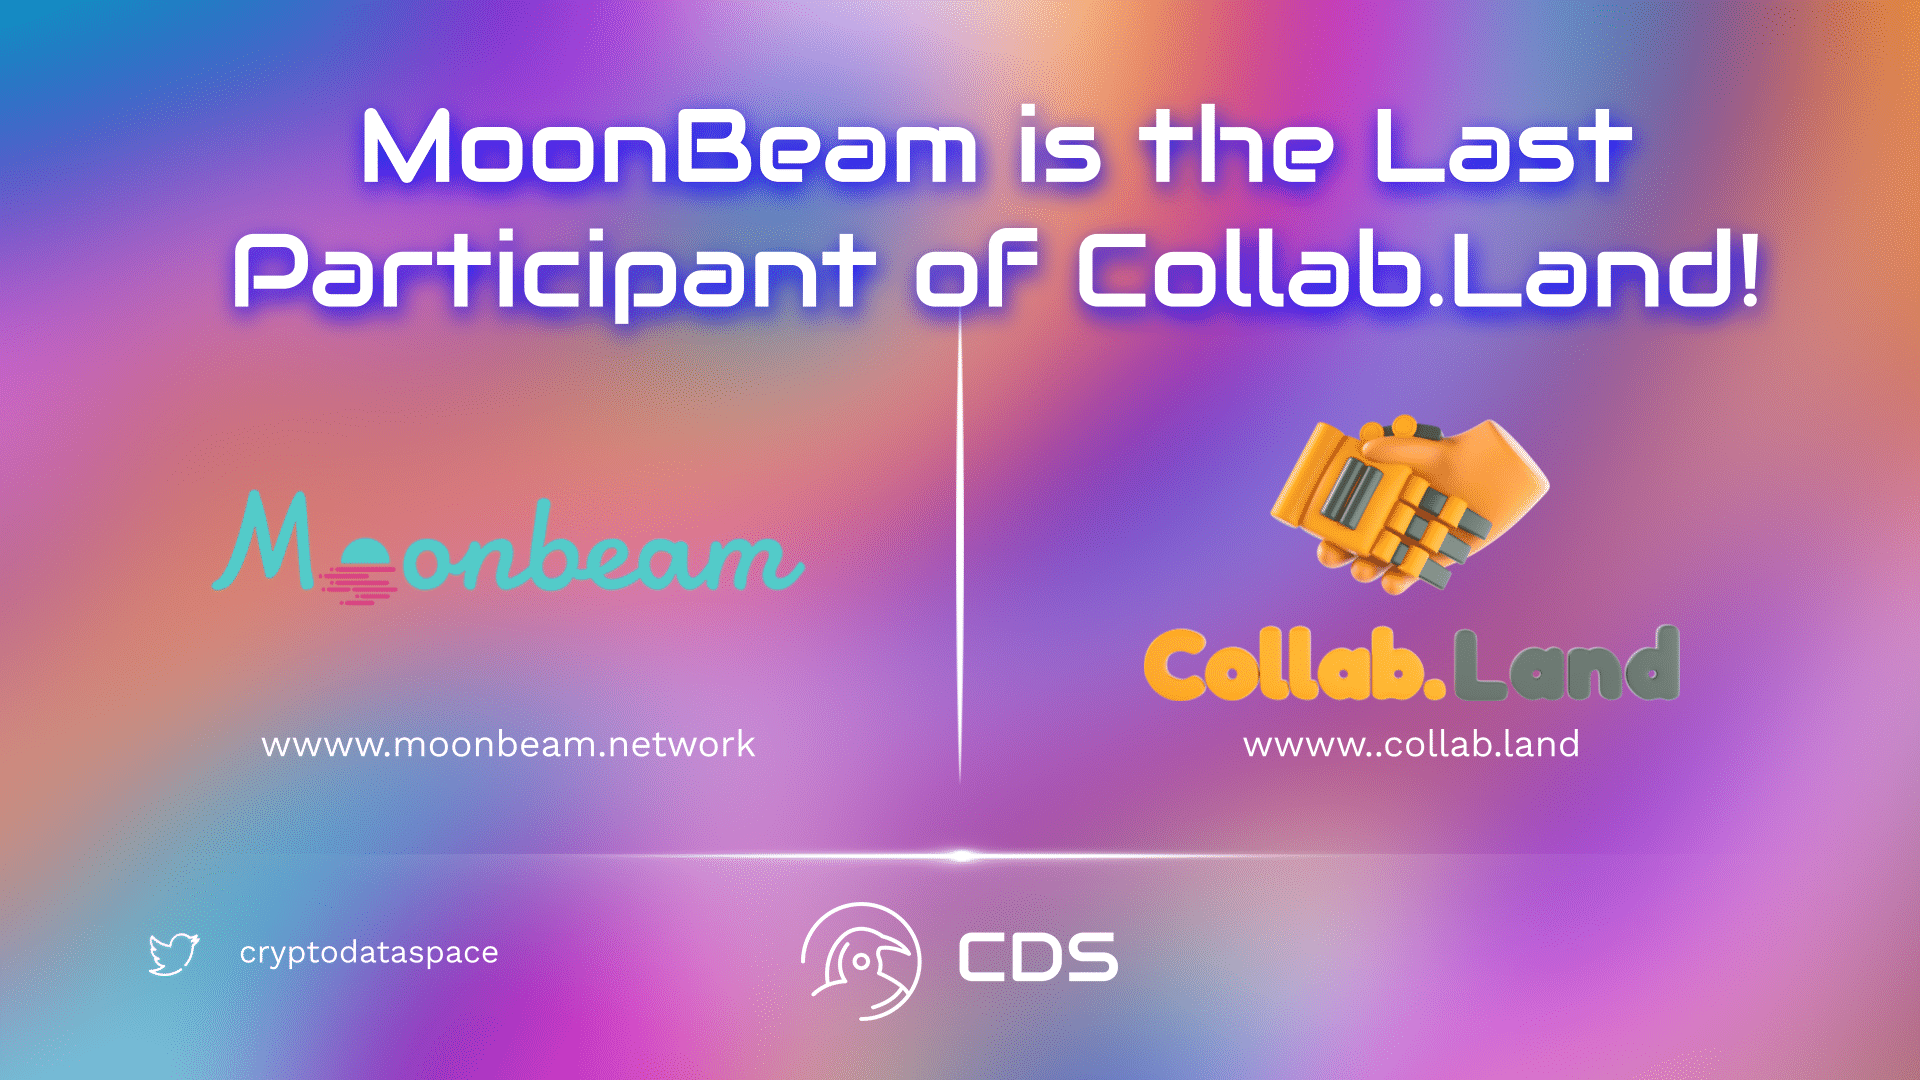 MoonBeam is the Last Participant of Collab.Land!